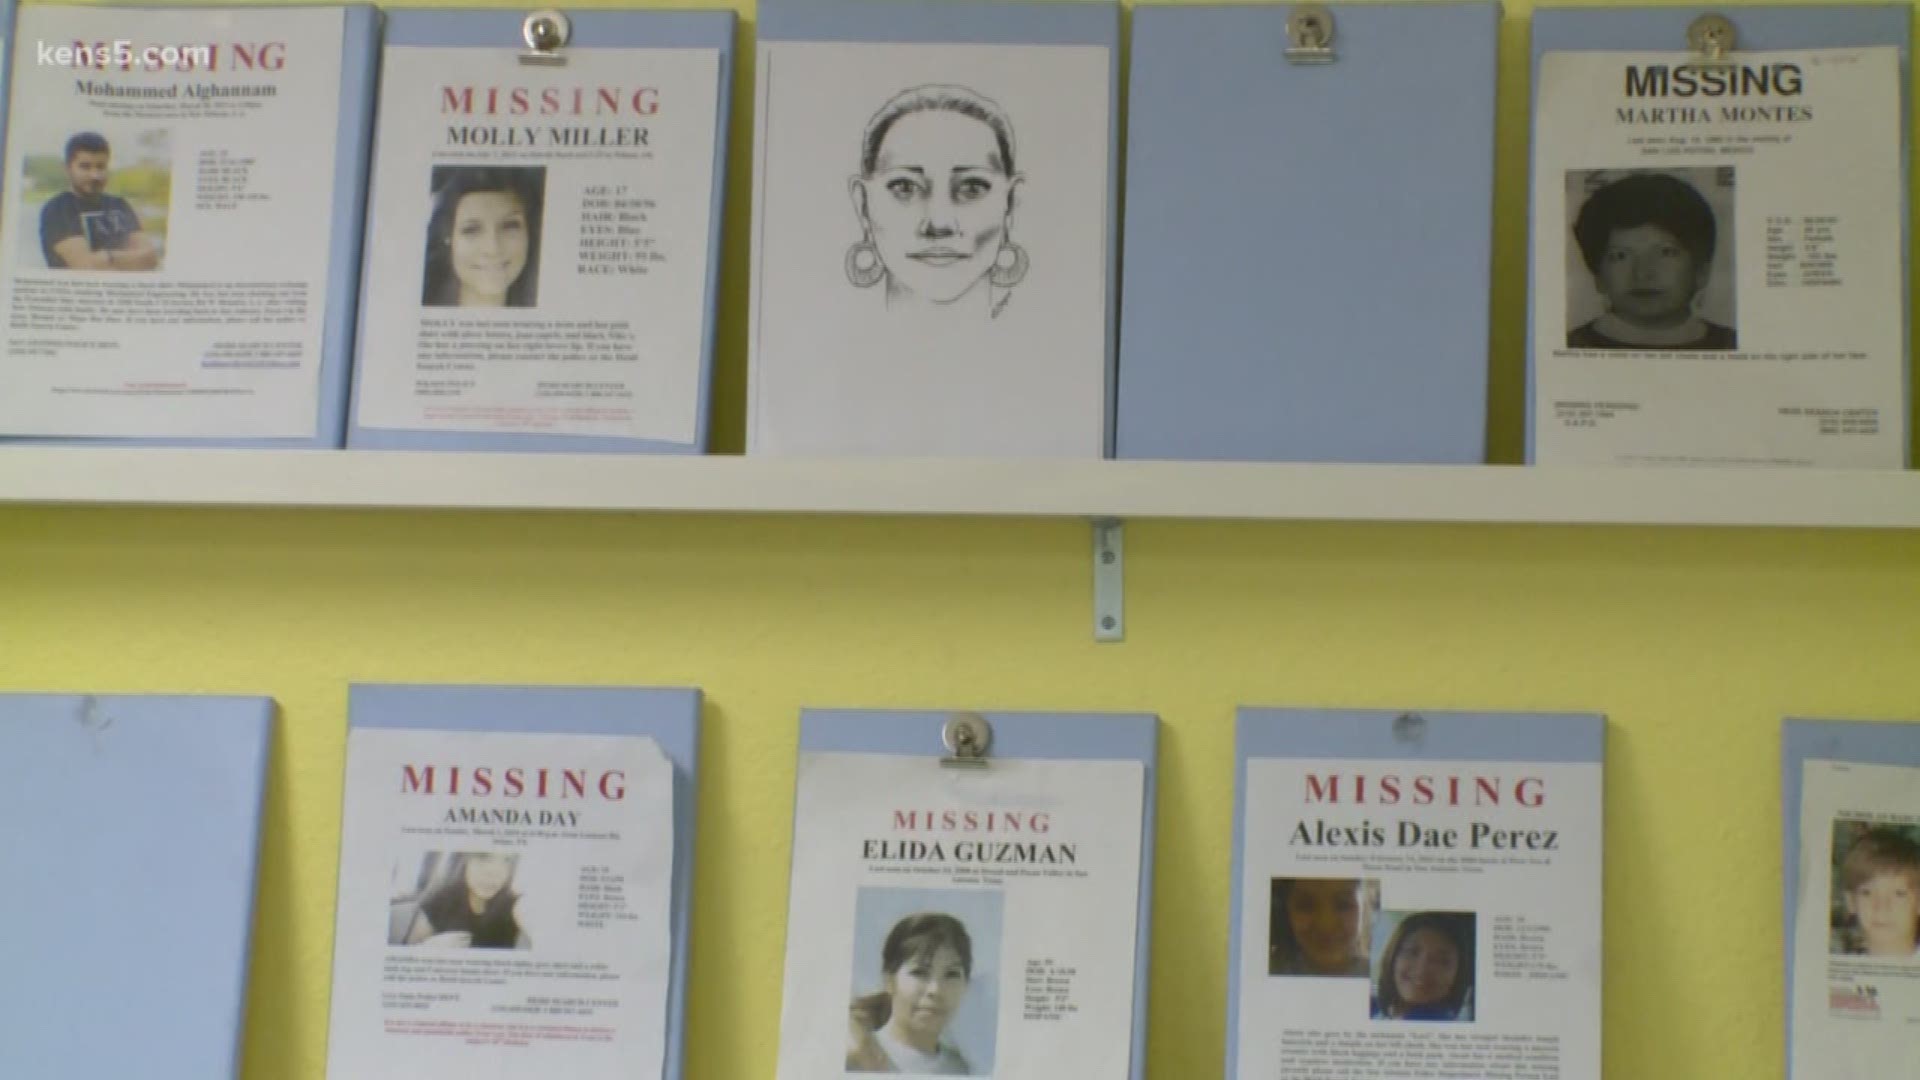 The Heidi Search Center, which has helped the families of missing people search for their loved ones and support them emotionally, will close its doors soon.